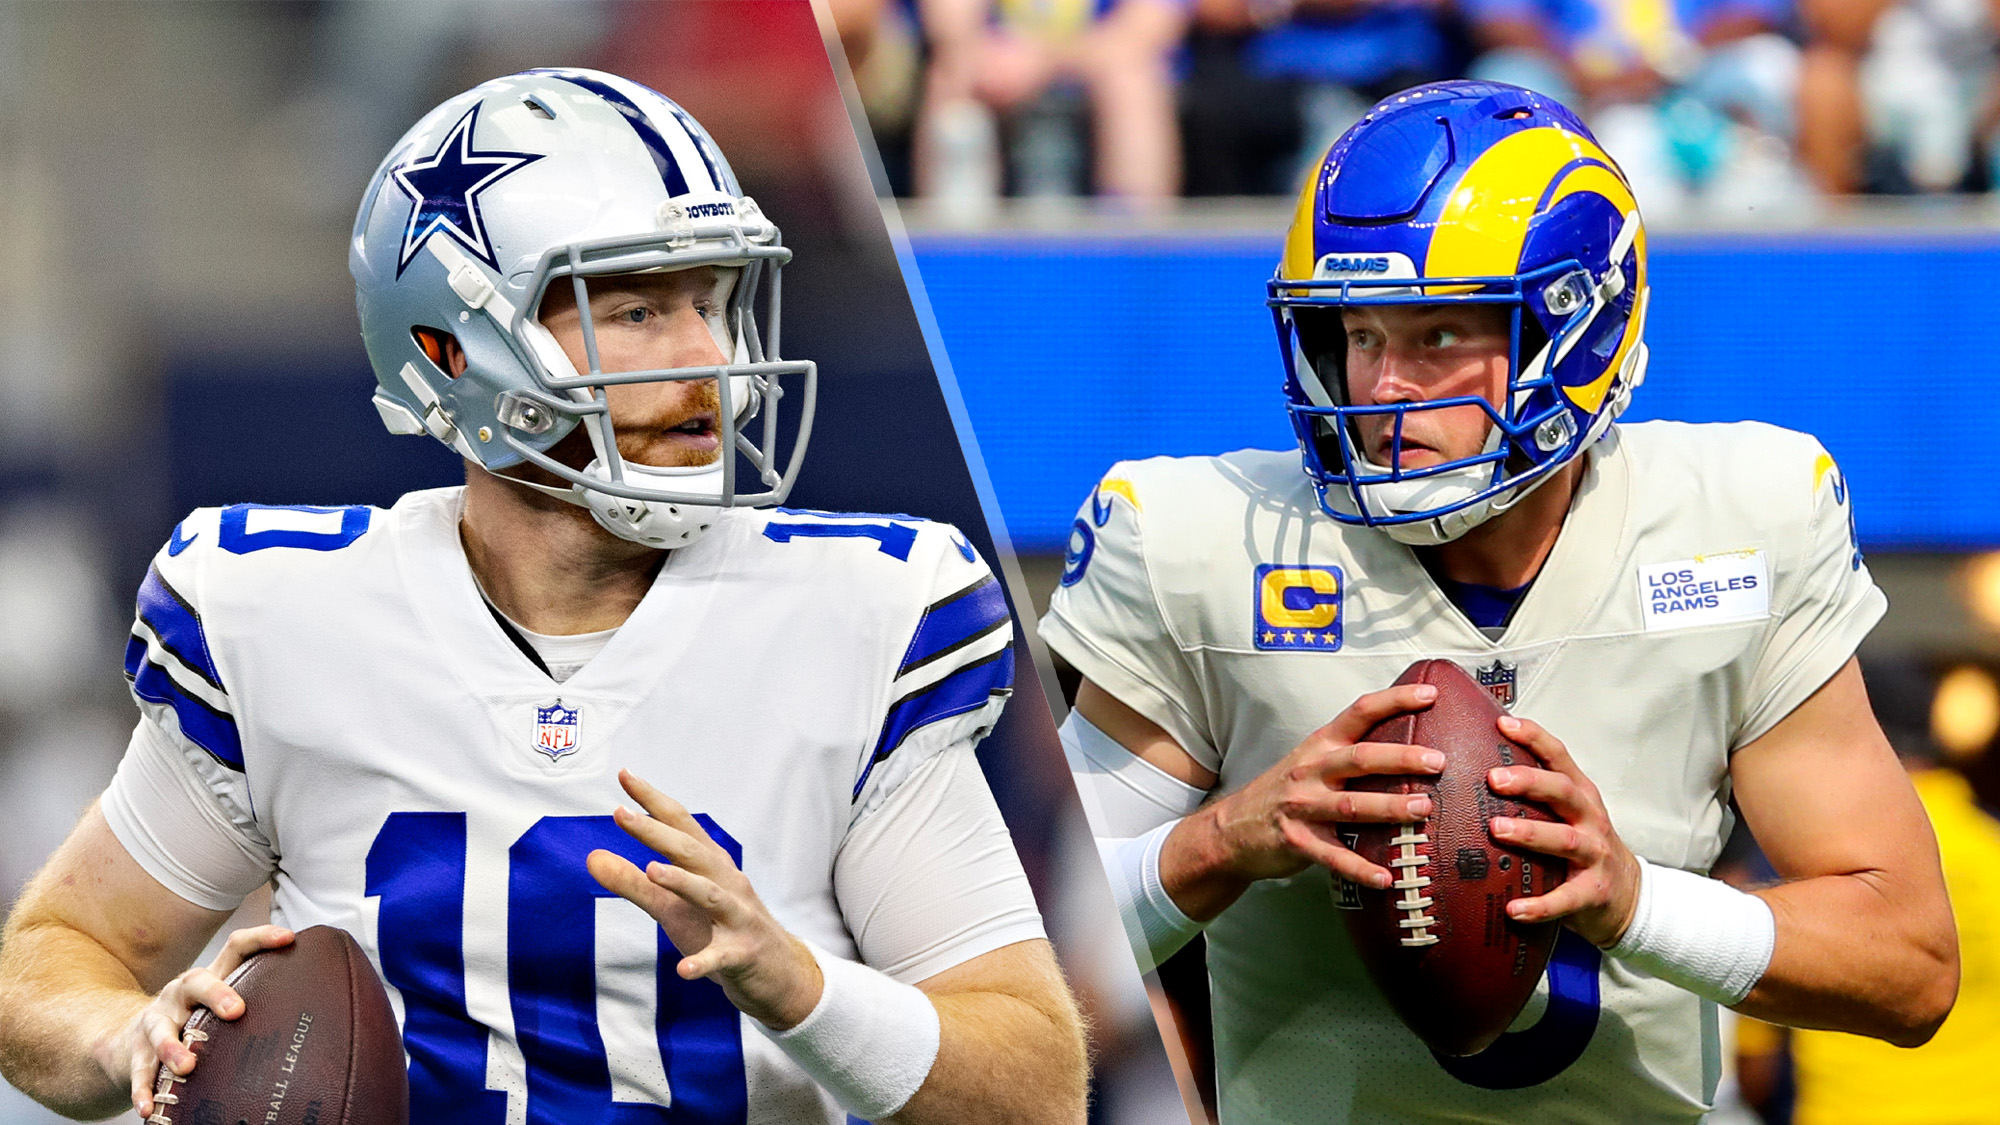 Cowboys vs Rams live stream is today: How to watch NFL week 5